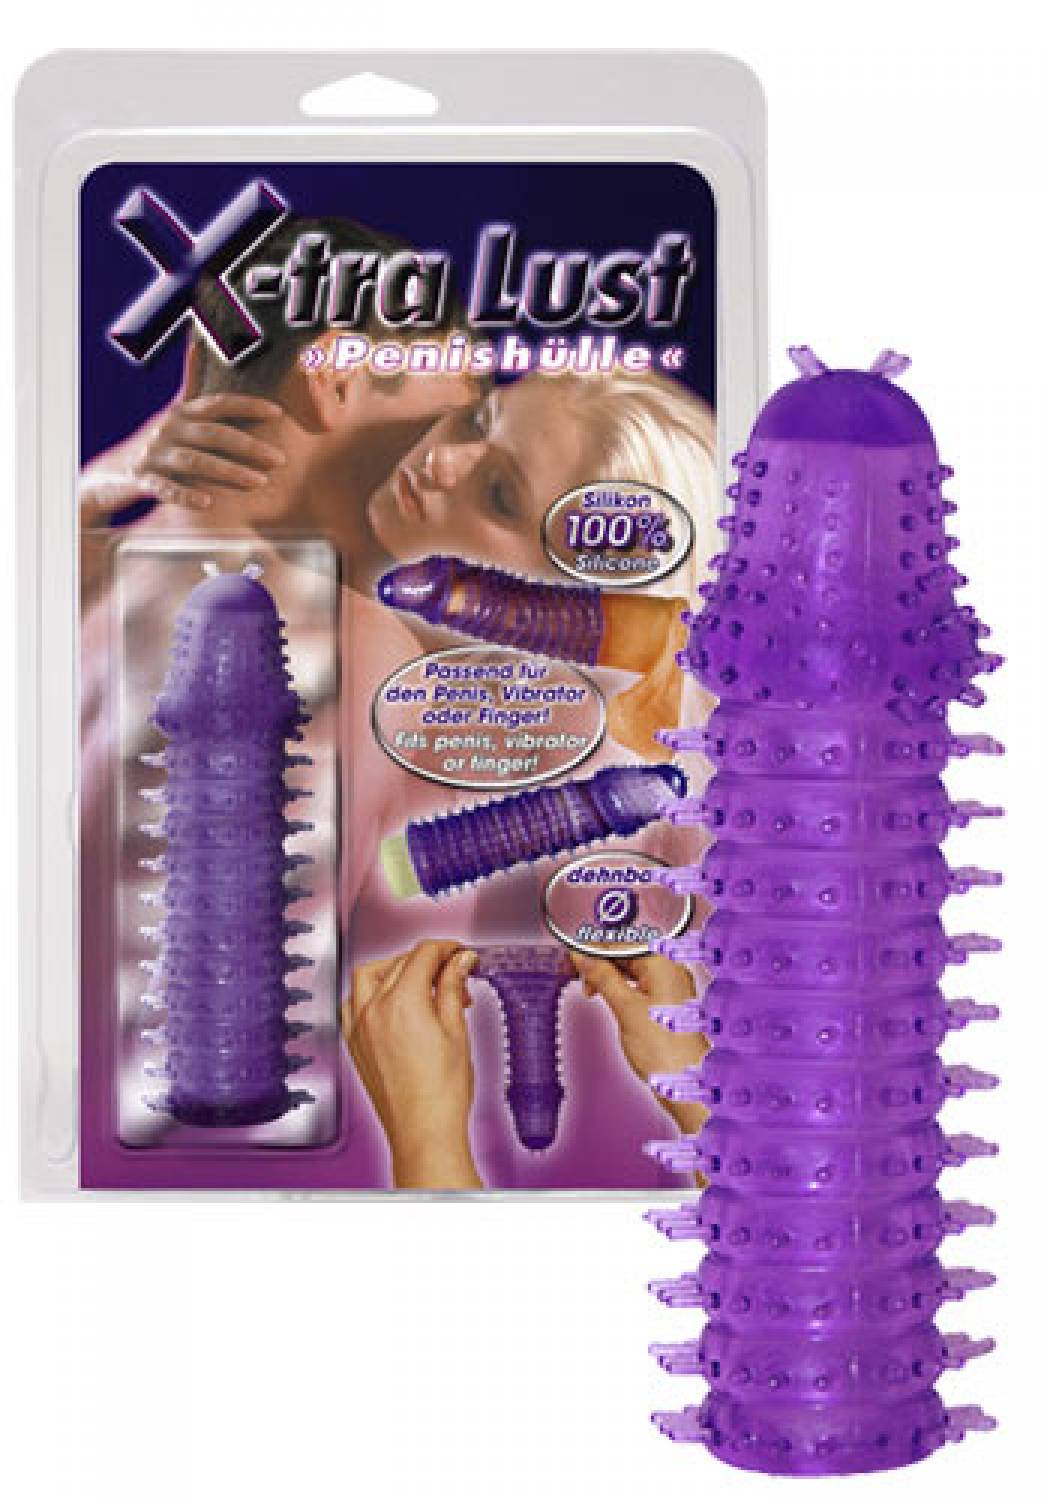 Erotic Entertainment Love Toys X-tra Lust - Super Stretch lila